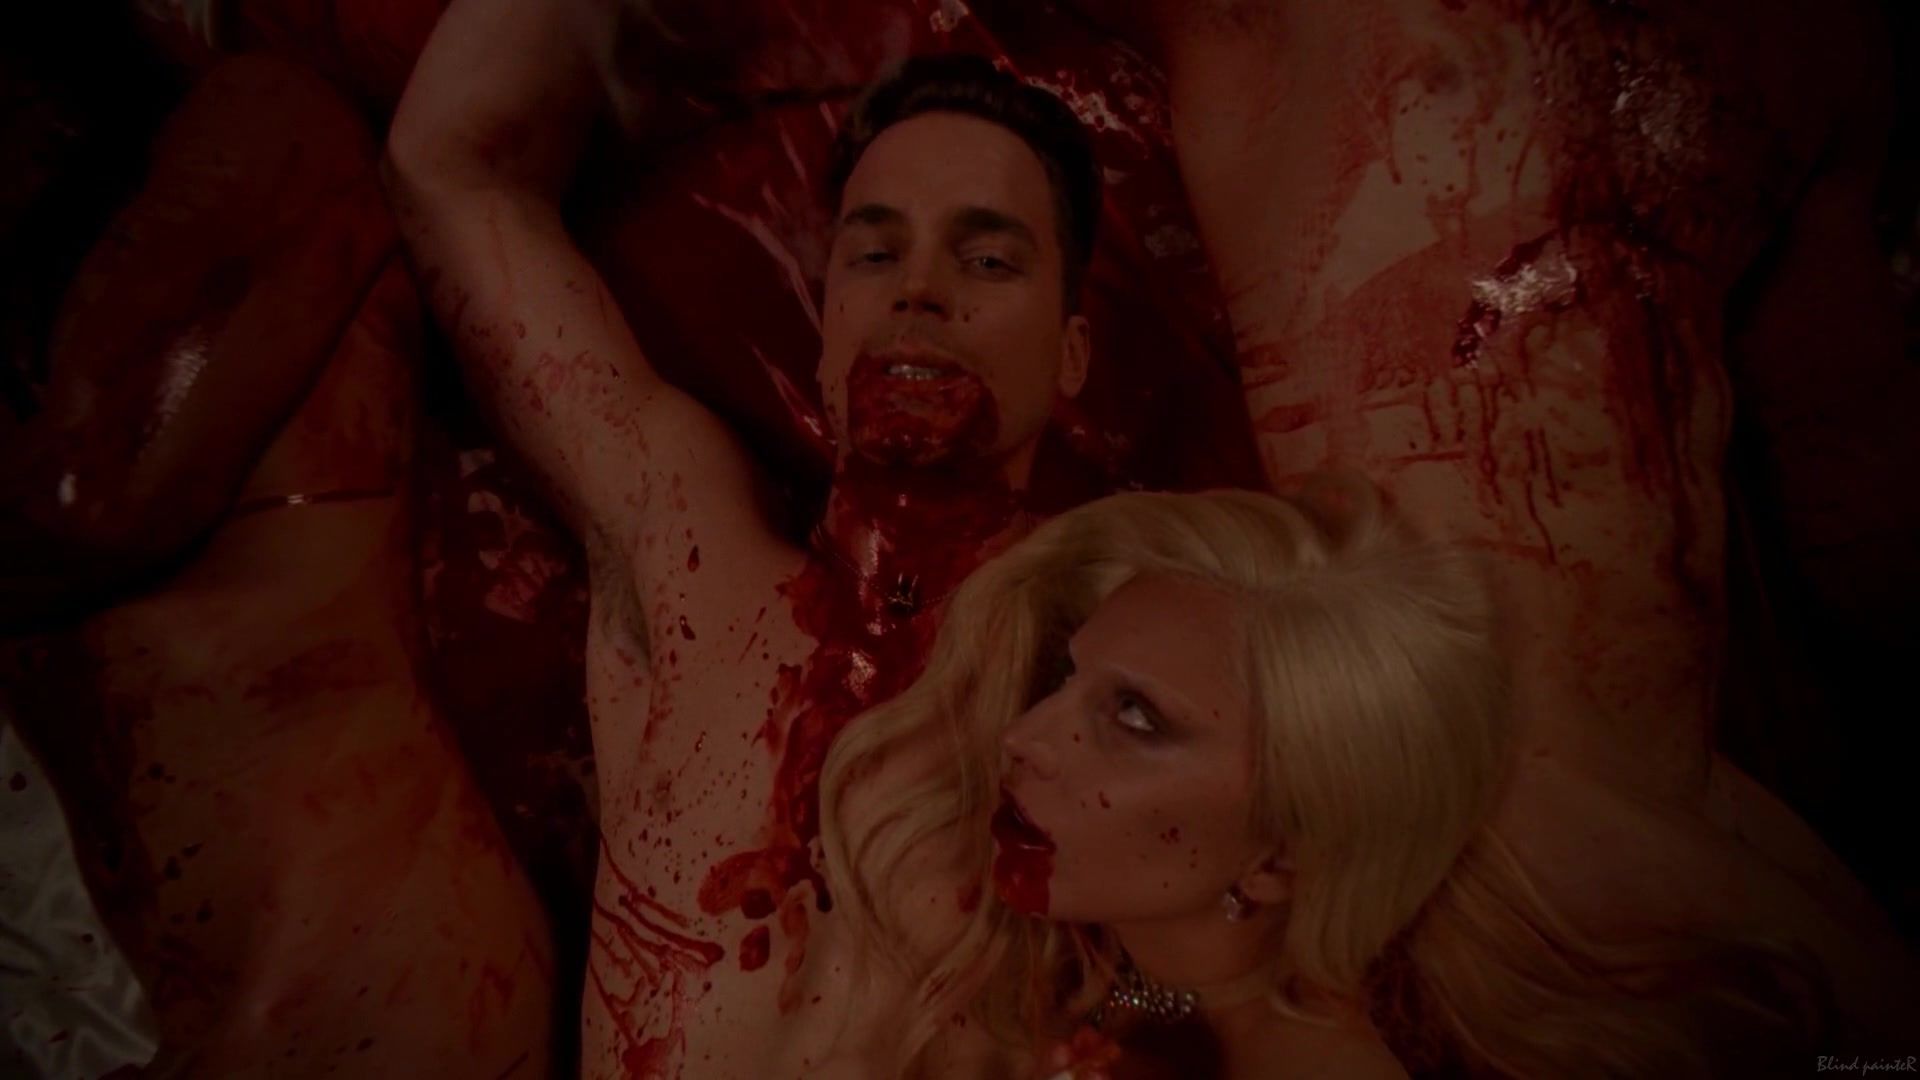 FetLife Lady Gaga & Chasty Ballesteros nude - American Horror Story S05E01 (2015) Uncensored